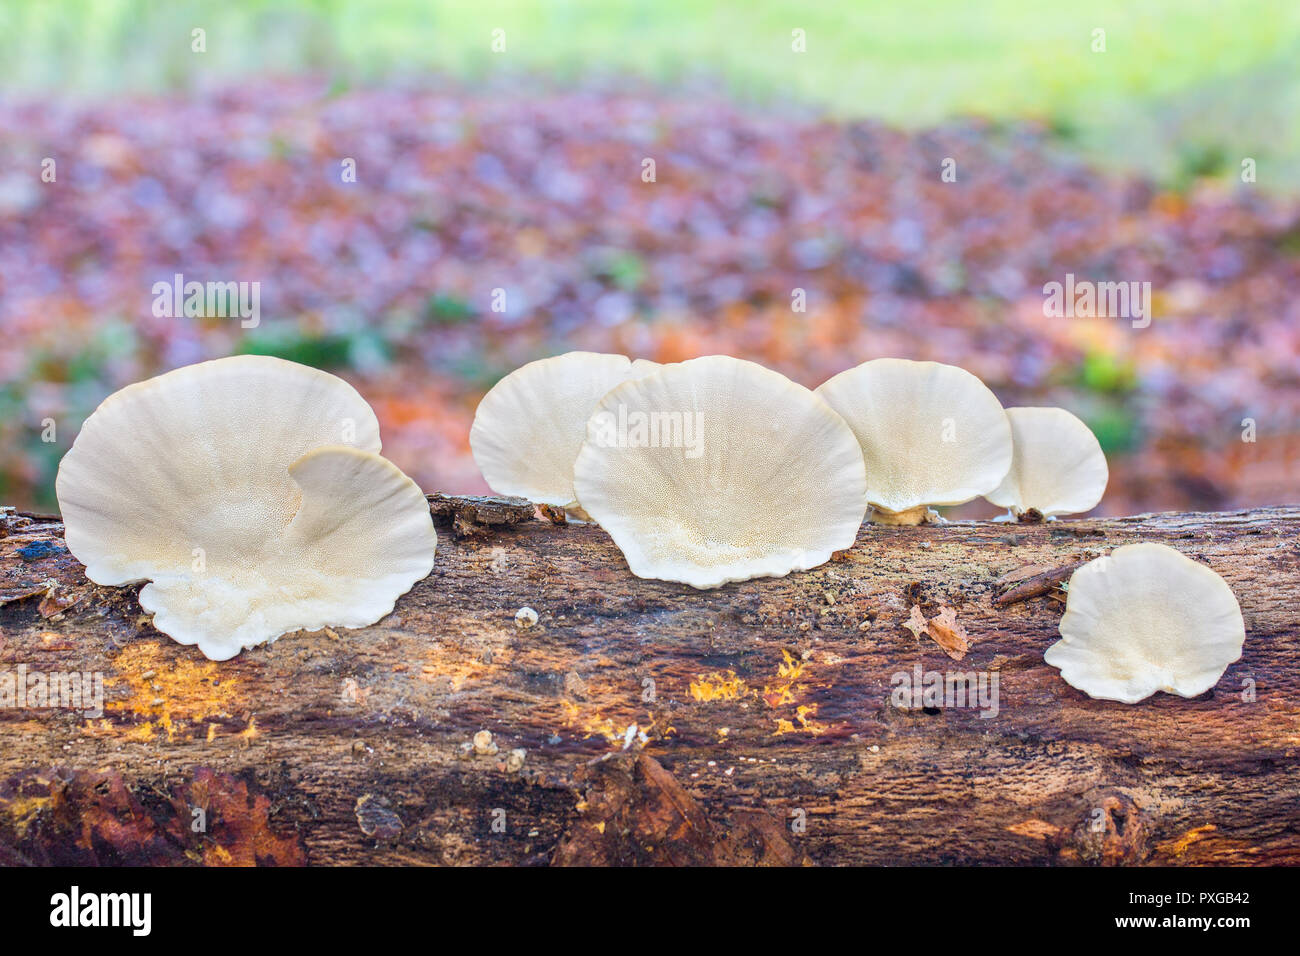 Flat white mushrooms growing on tree trunk in forest Stock Photo